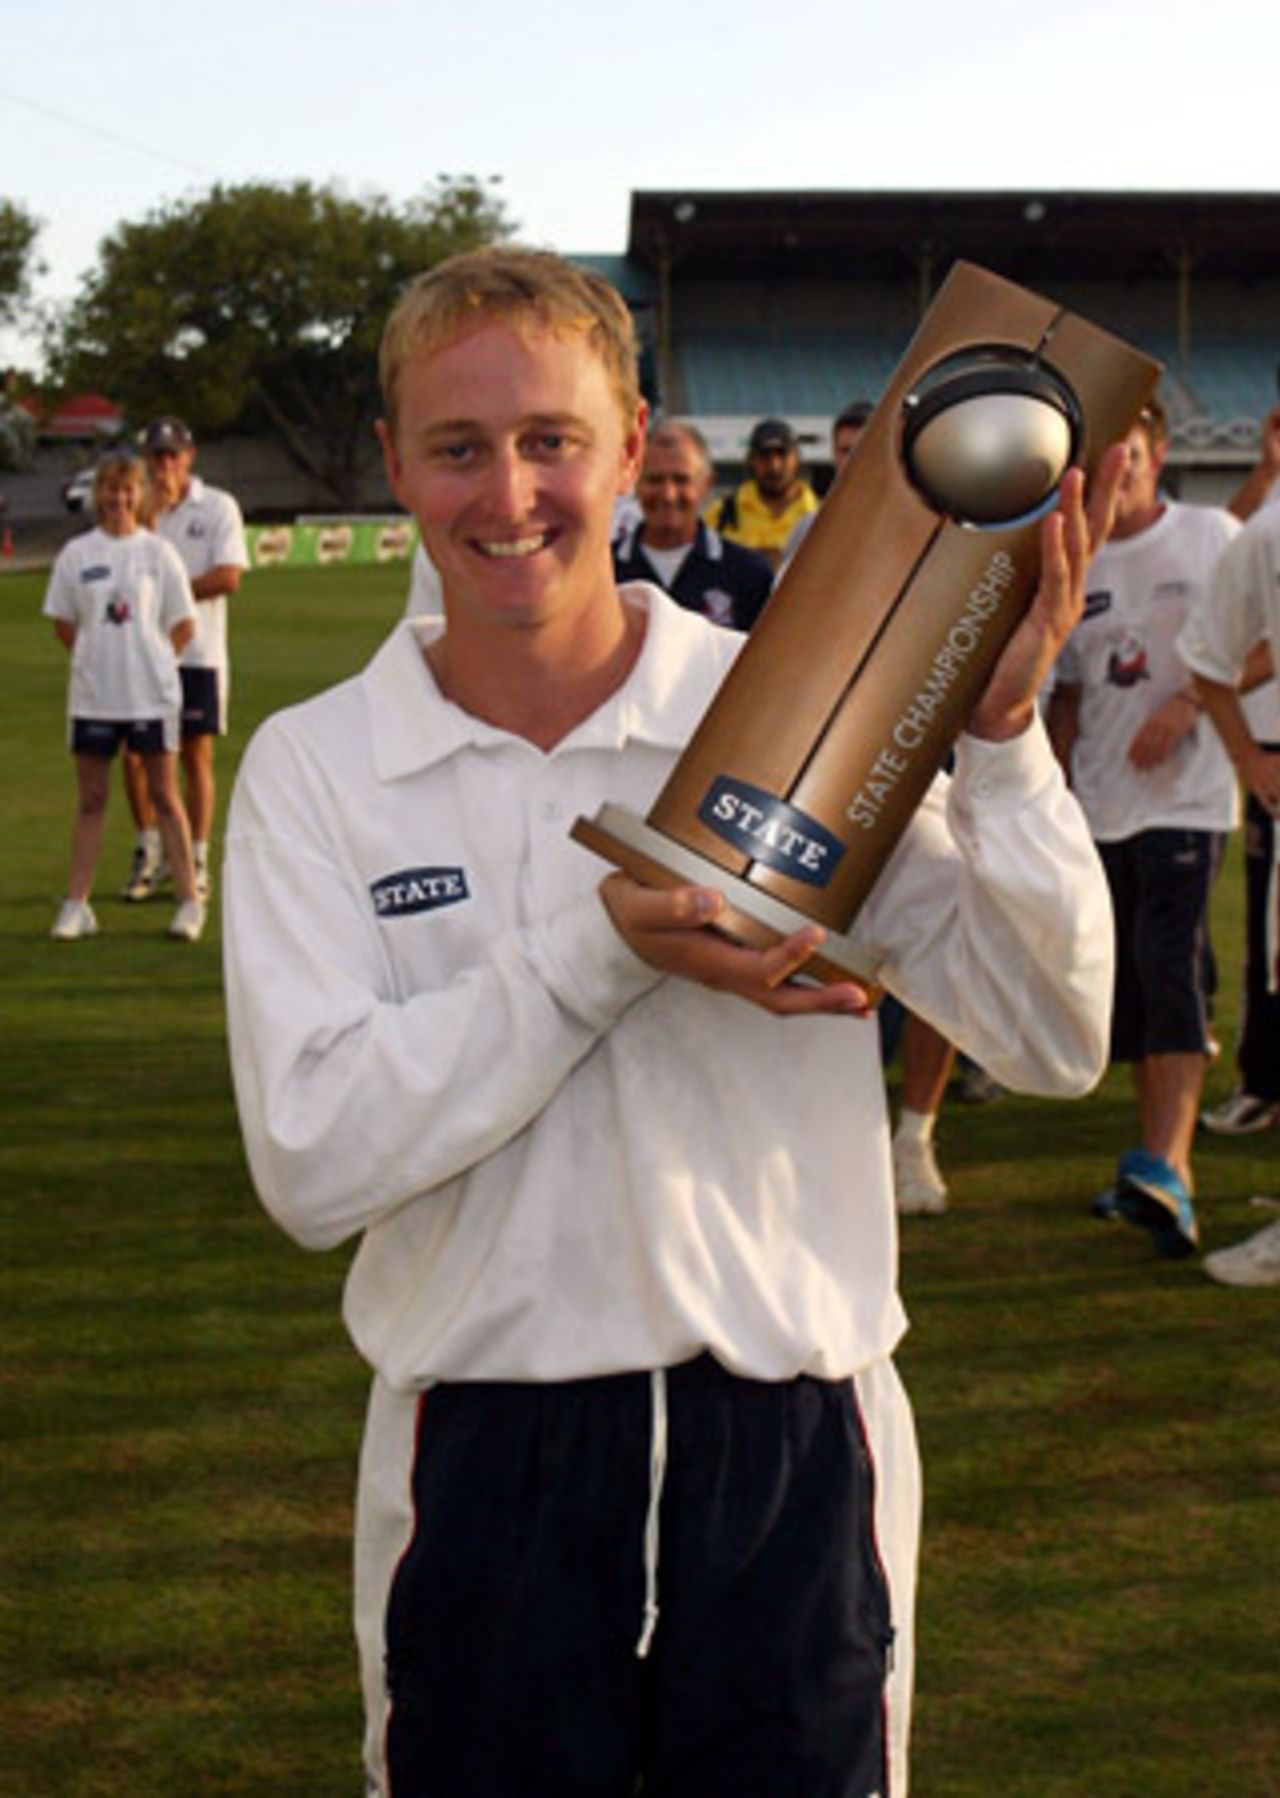 Winning Auckland captain Brooke Walker holds the 2002/03 State Championship trophy. State Championship: Auckland v Northern Districts at Eden Park Outer Oval, Auckland, 17-20 March 2003 (20 March 2003).